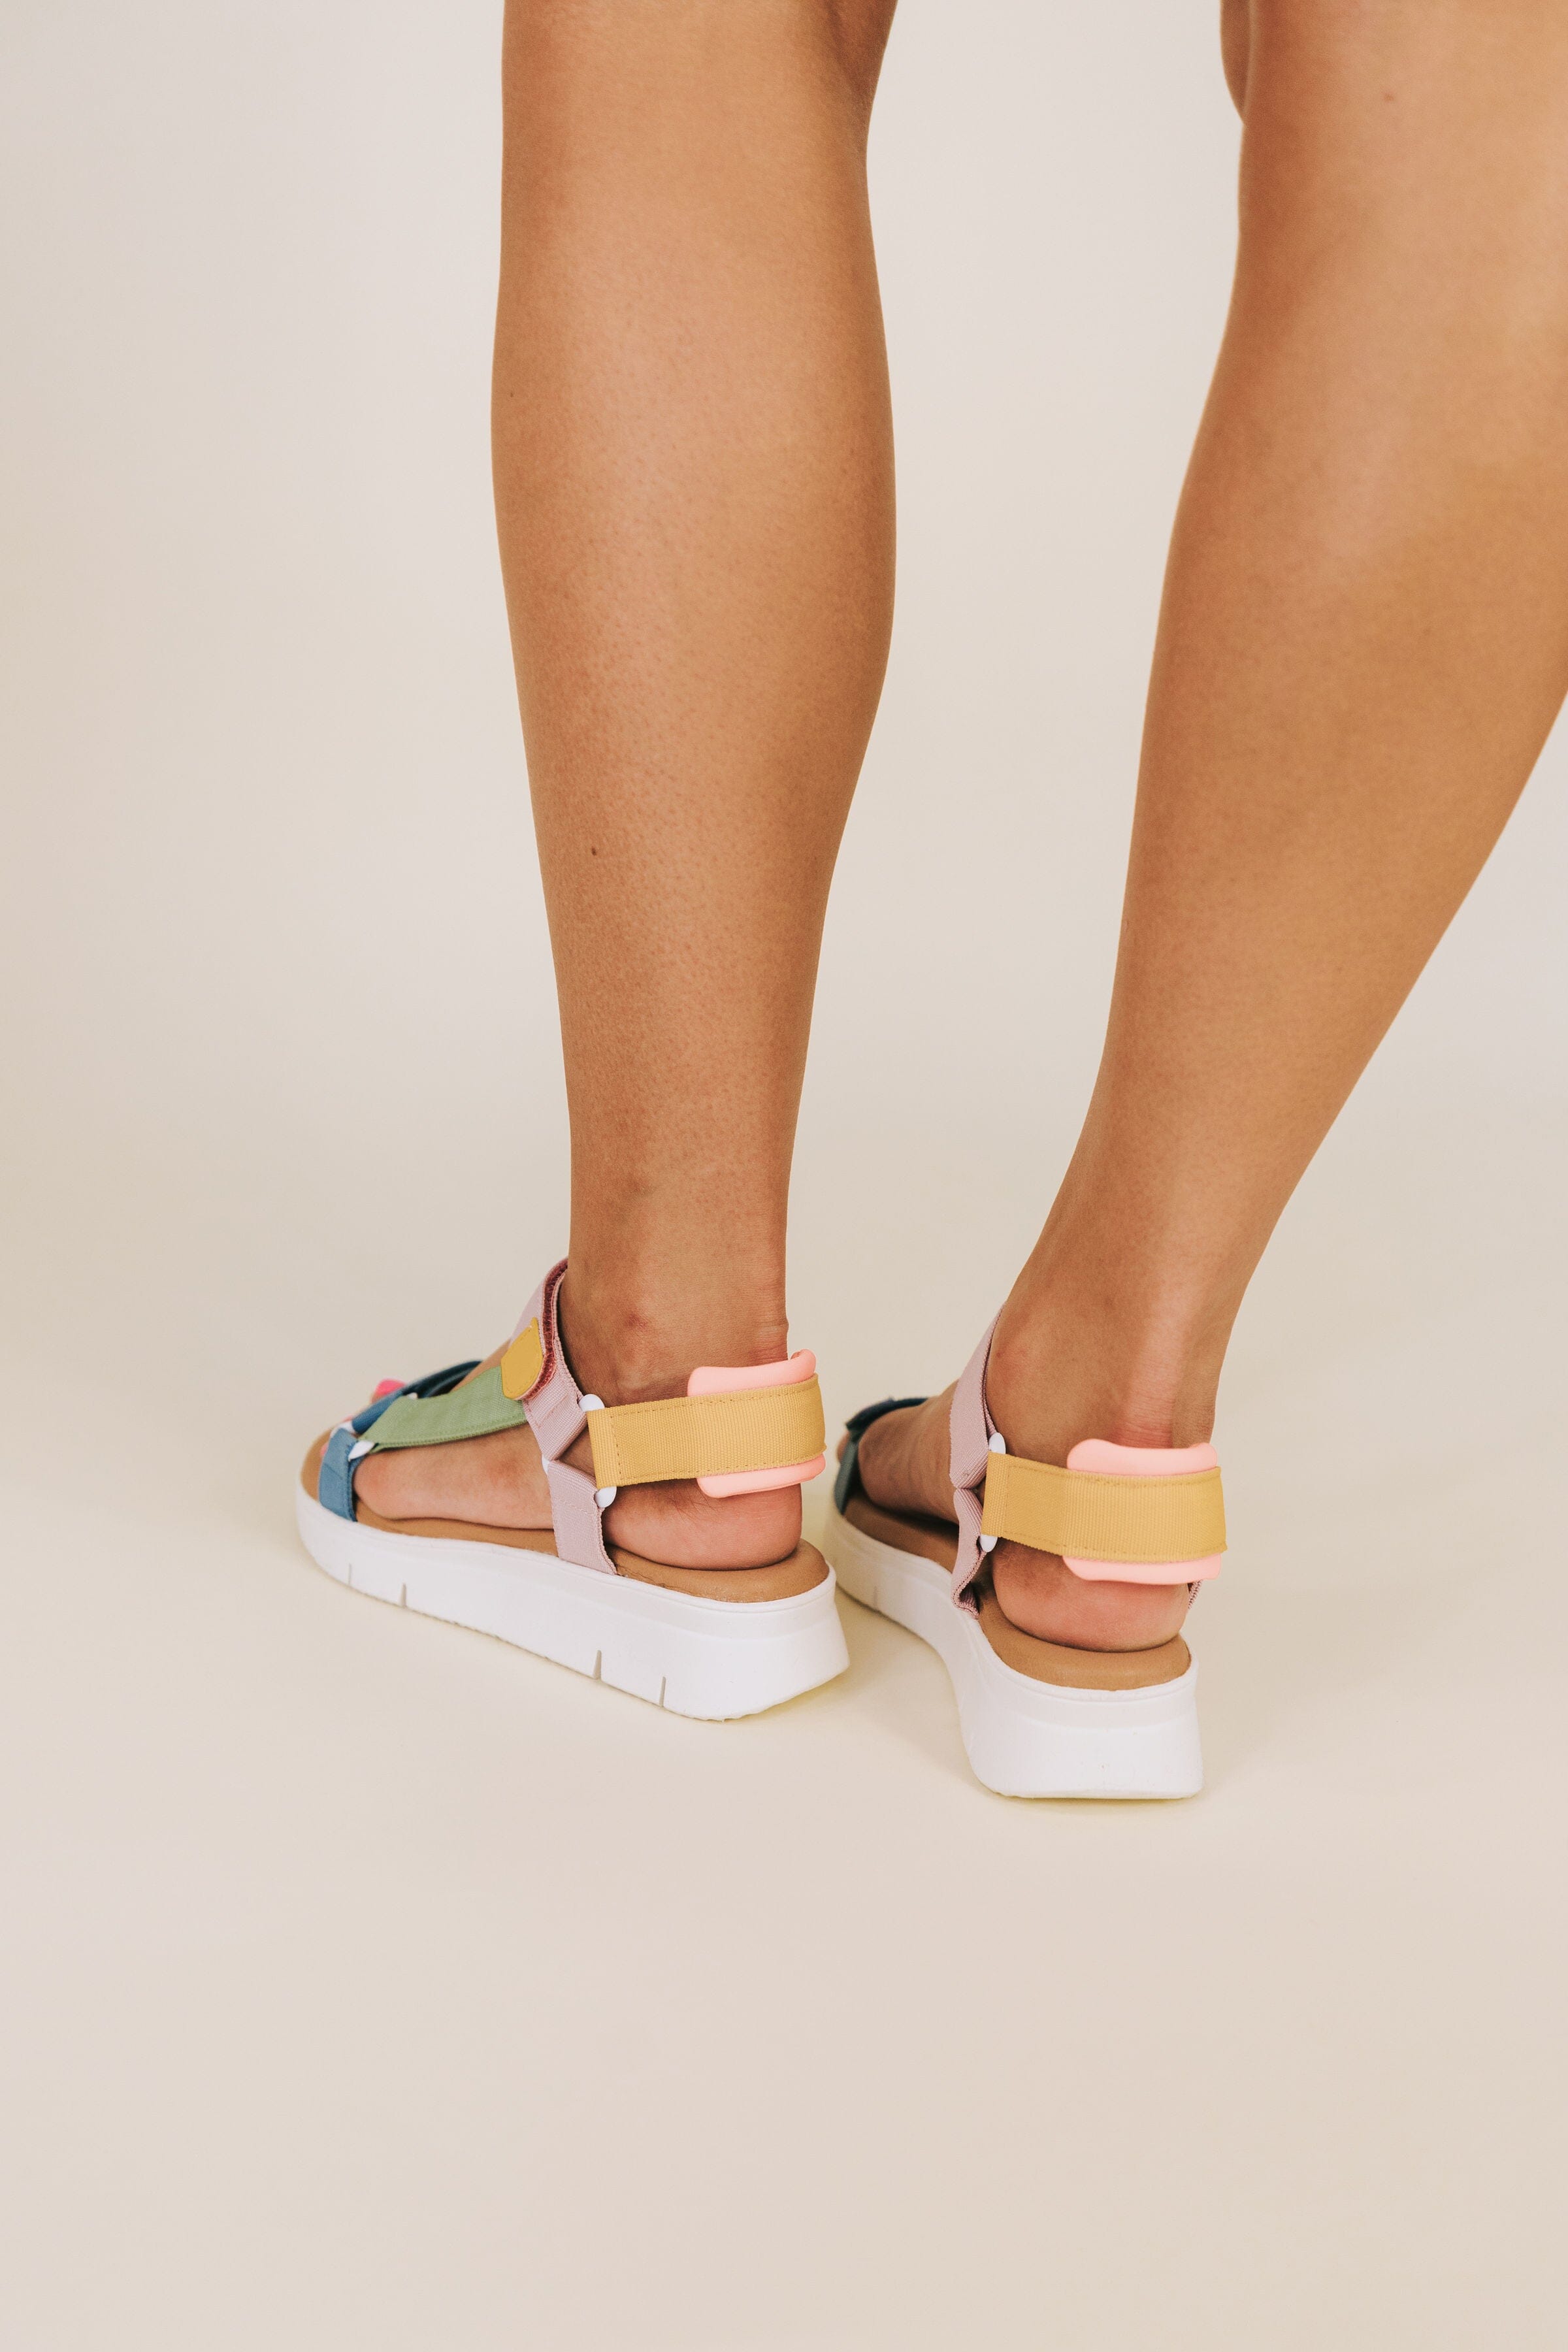 CHINESE LAUNDRY - Qwest Sandals